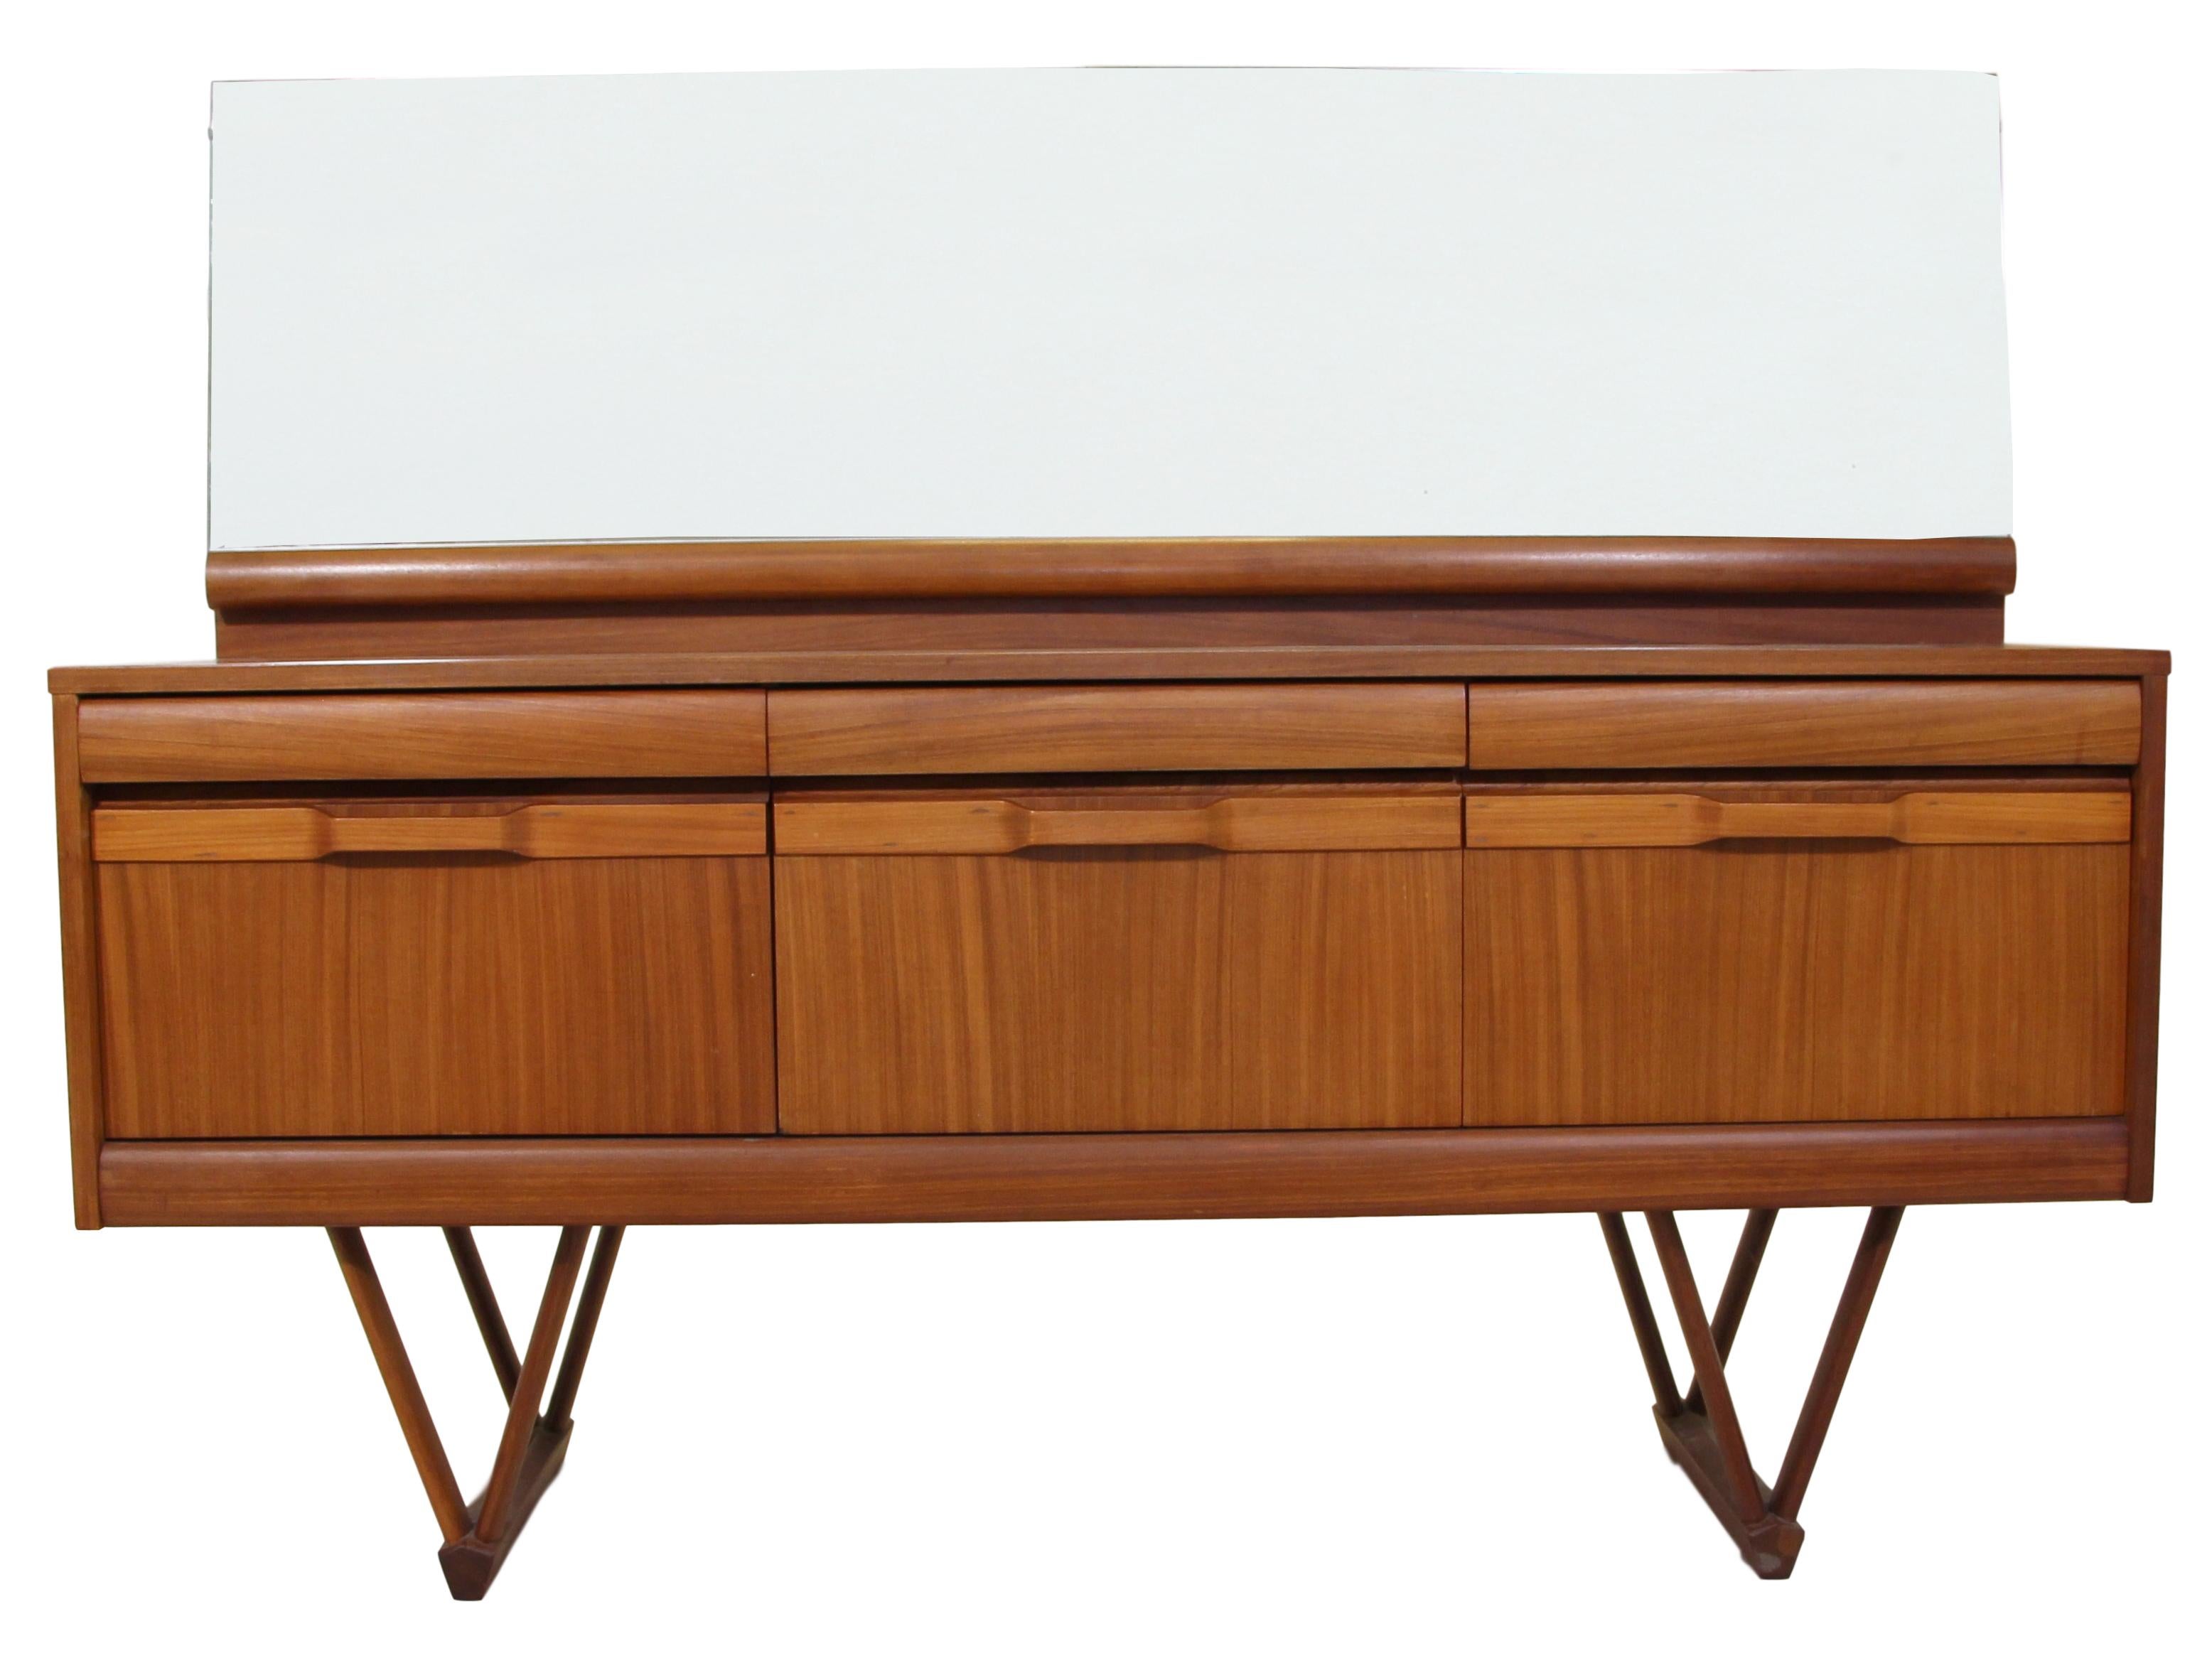 This is an outstanding 1960s teak dresser or credenza with V shaped legs.
Made by Elliots of Newbury. Made in England. 
Featuring 3 large drawers at the bottom and 3 small drawers at the top. Original brown baize in the top middle drawer.

Very